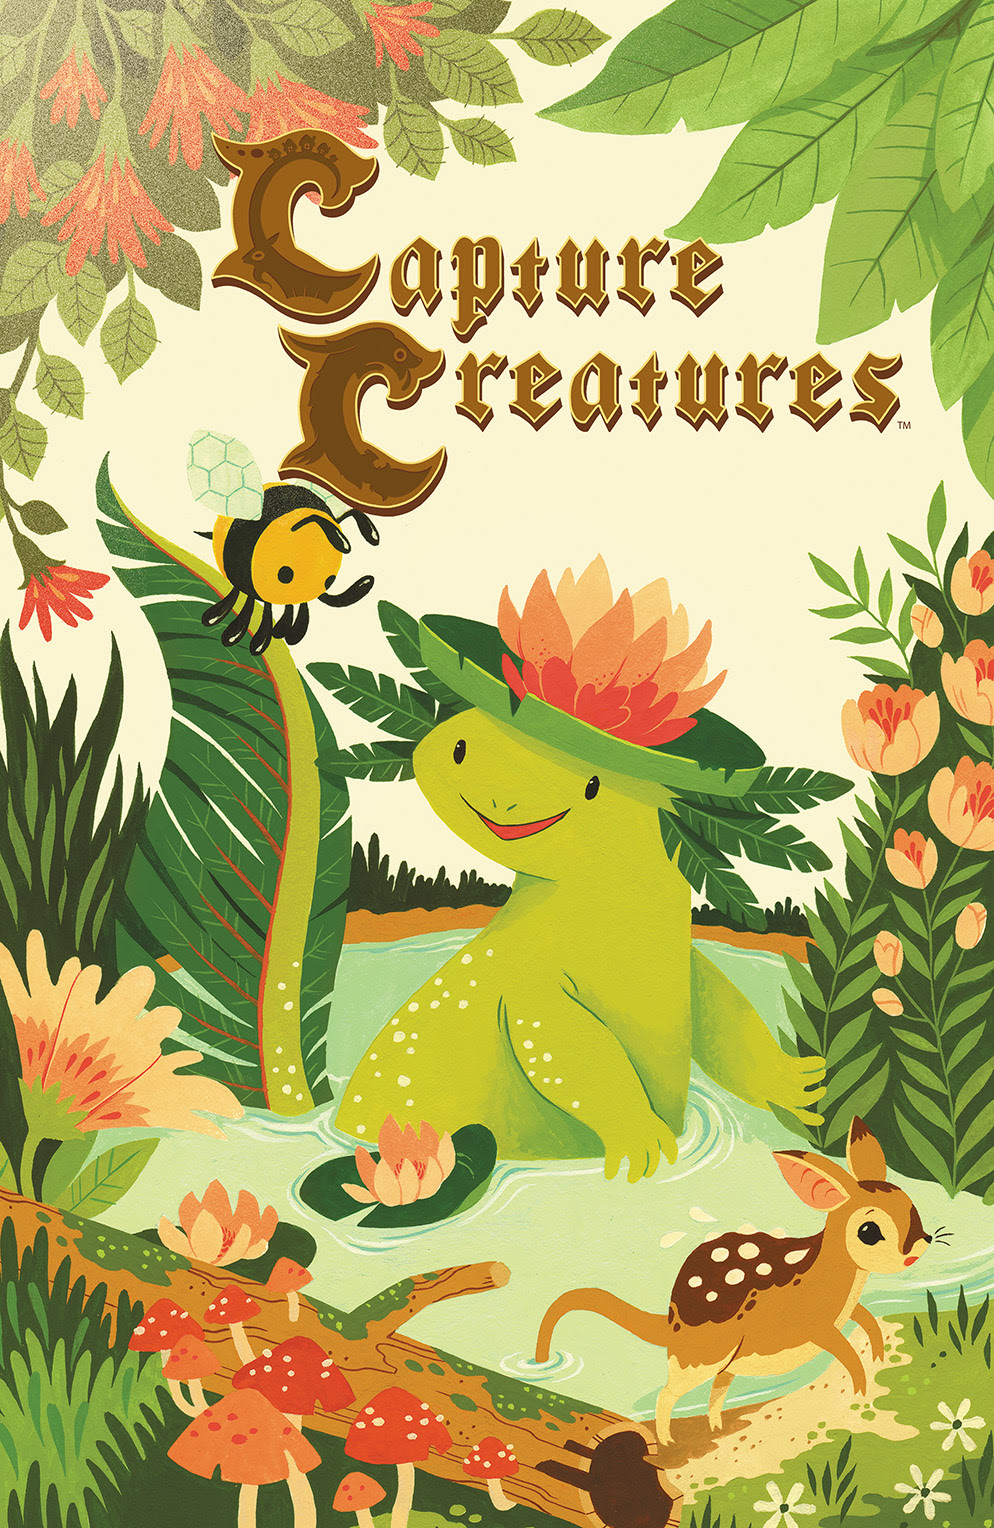 CAPTURE CREATURES #2 Cover B by Teagan White